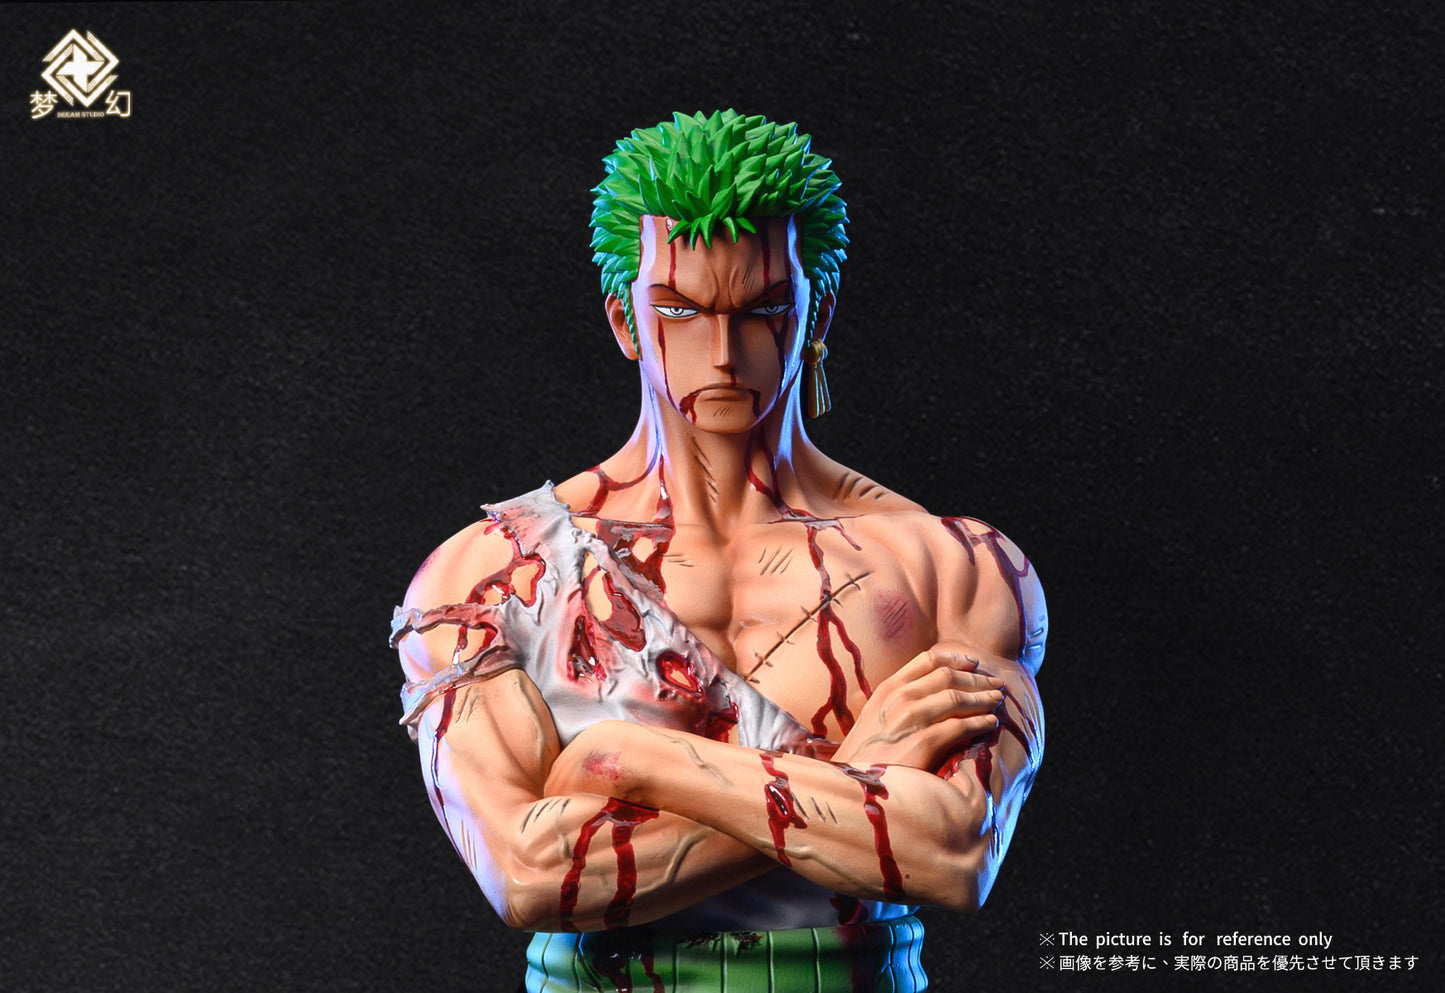 DREAM STUDIO – ONE PIECE: MONSTER TRIO ICONIC SCENE SERIES 1. BLOODY ZORO [SOLD OUT]